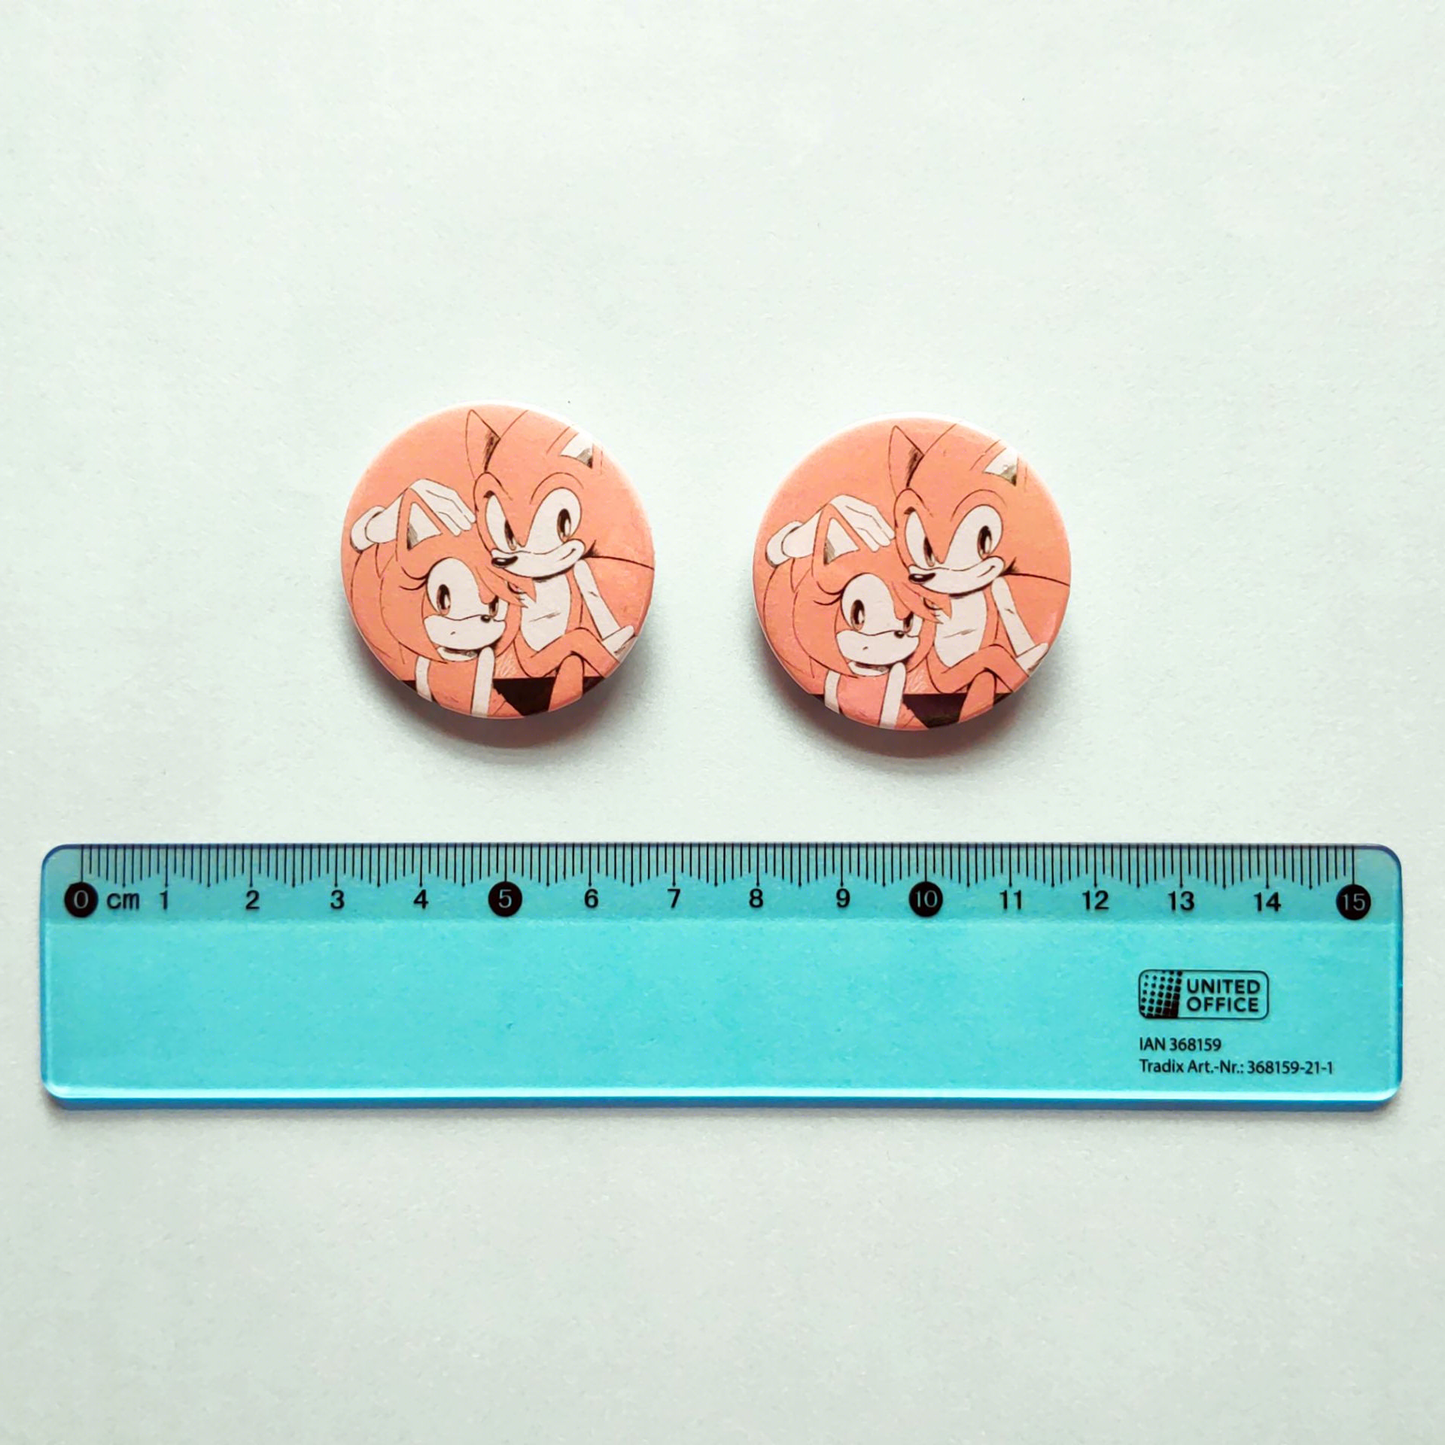 Photo of a pink Sonic and Amy button badges laid across a blue background, with a blue transparent ruler next to it to show size comparison.